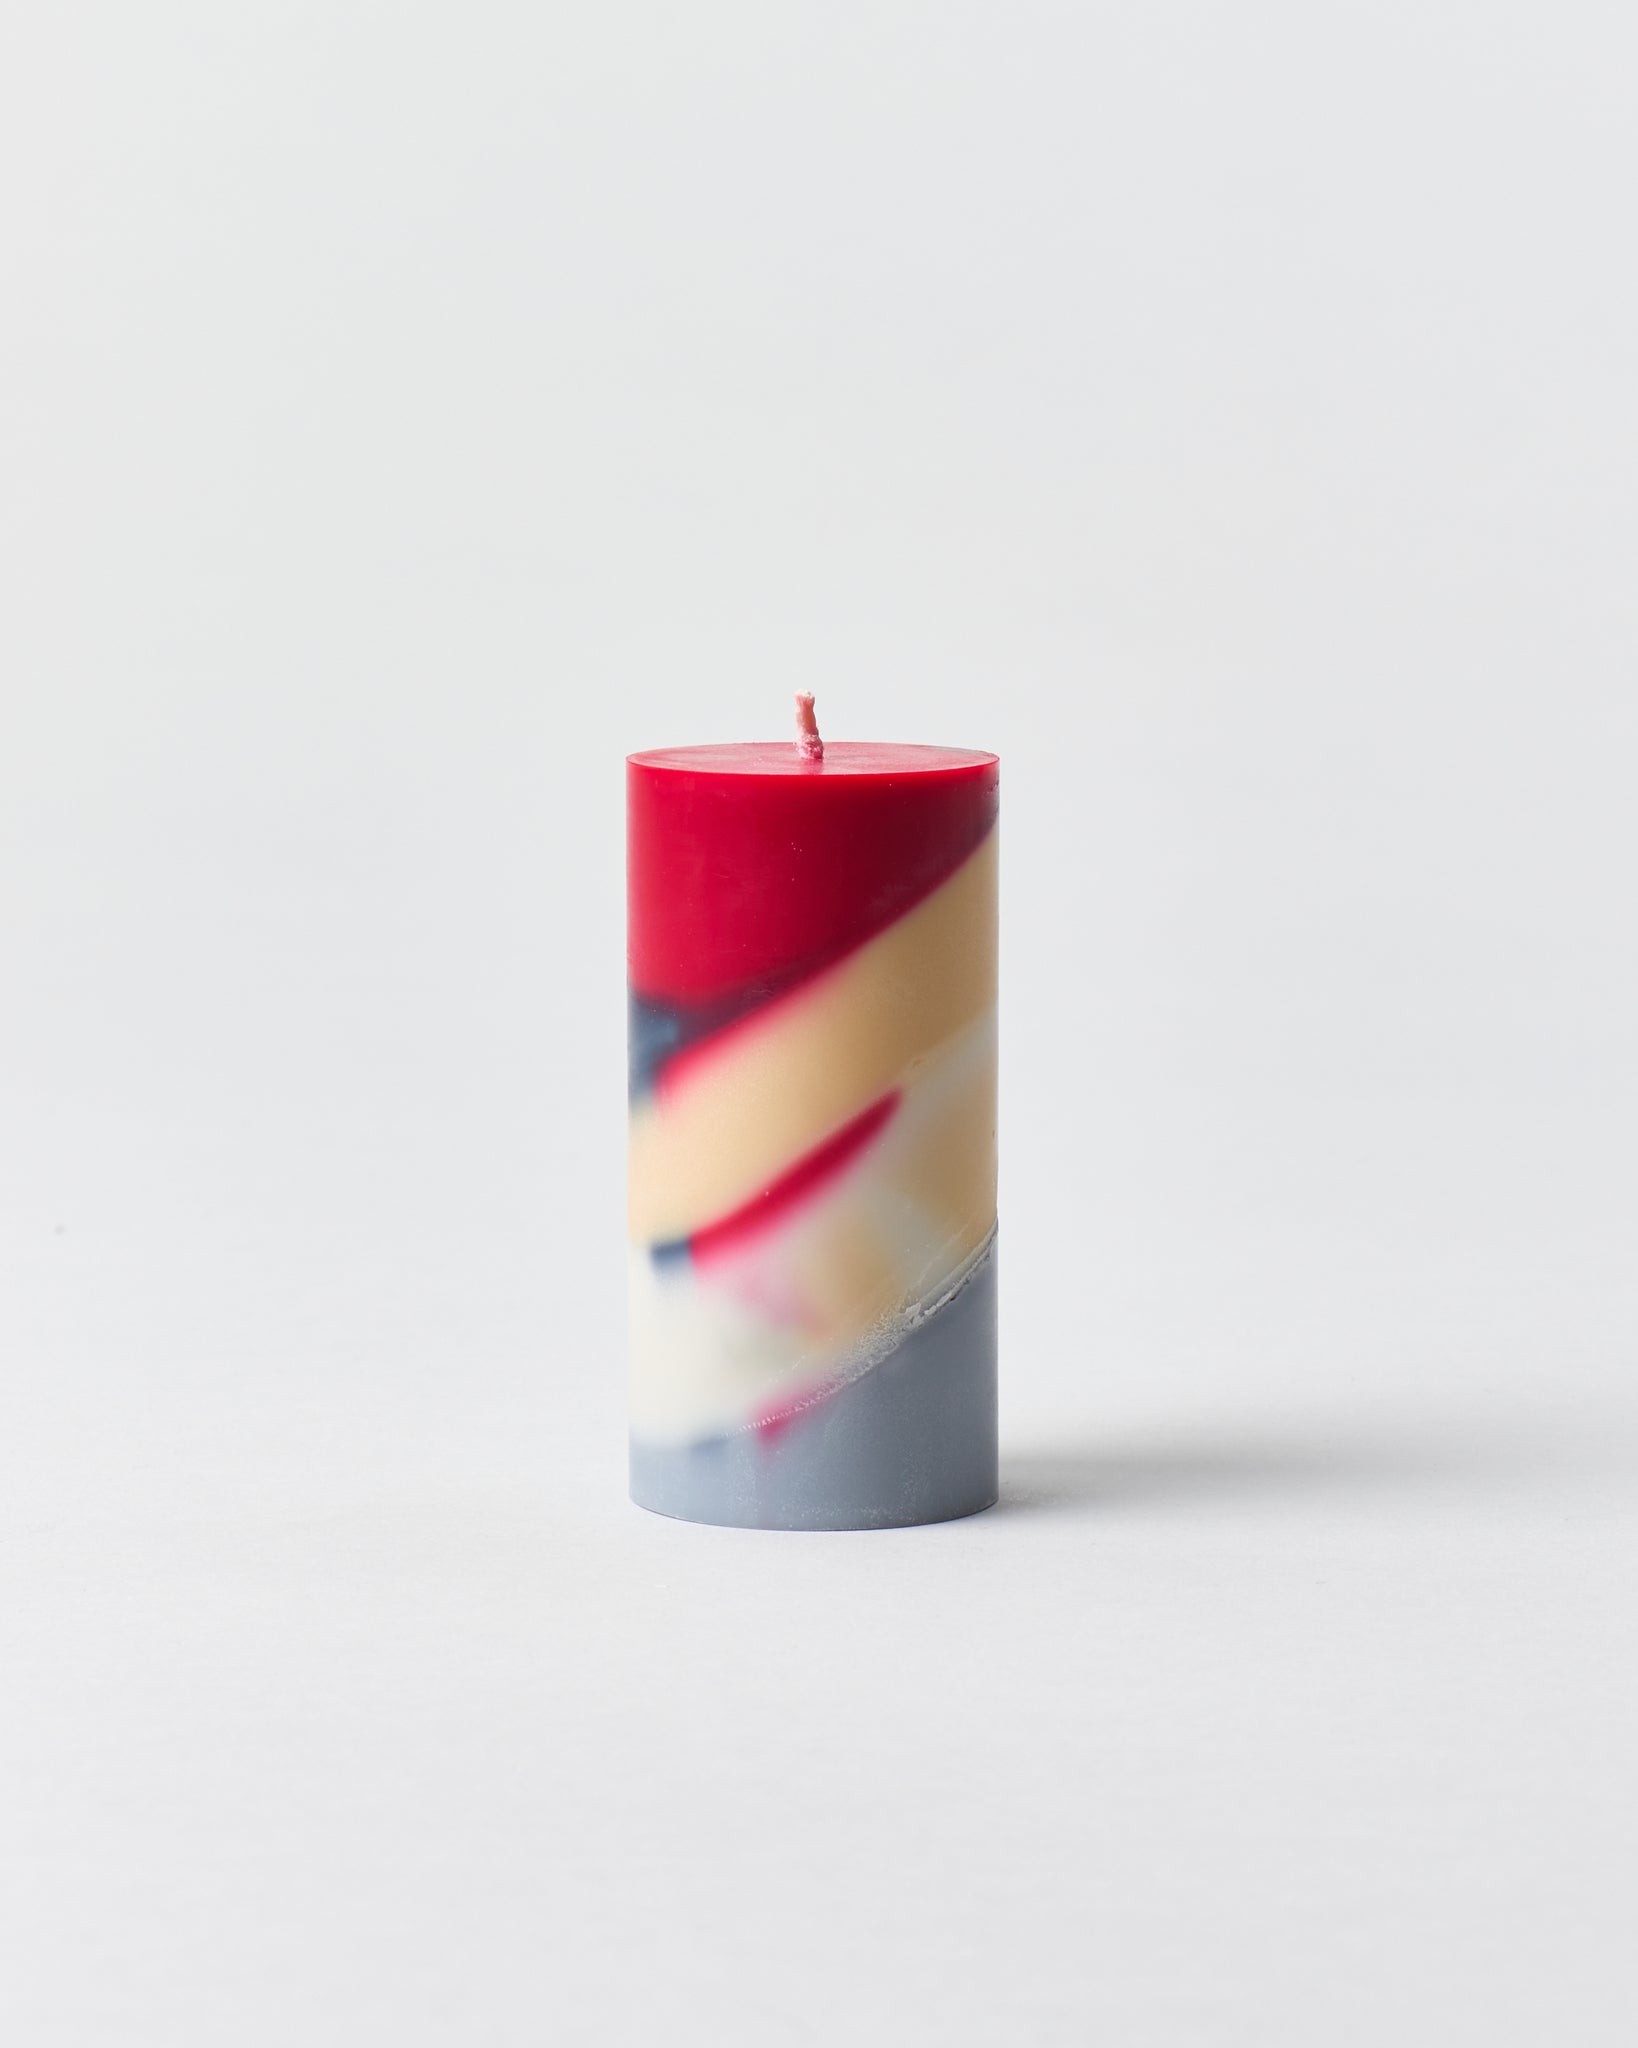 Candle No. 1